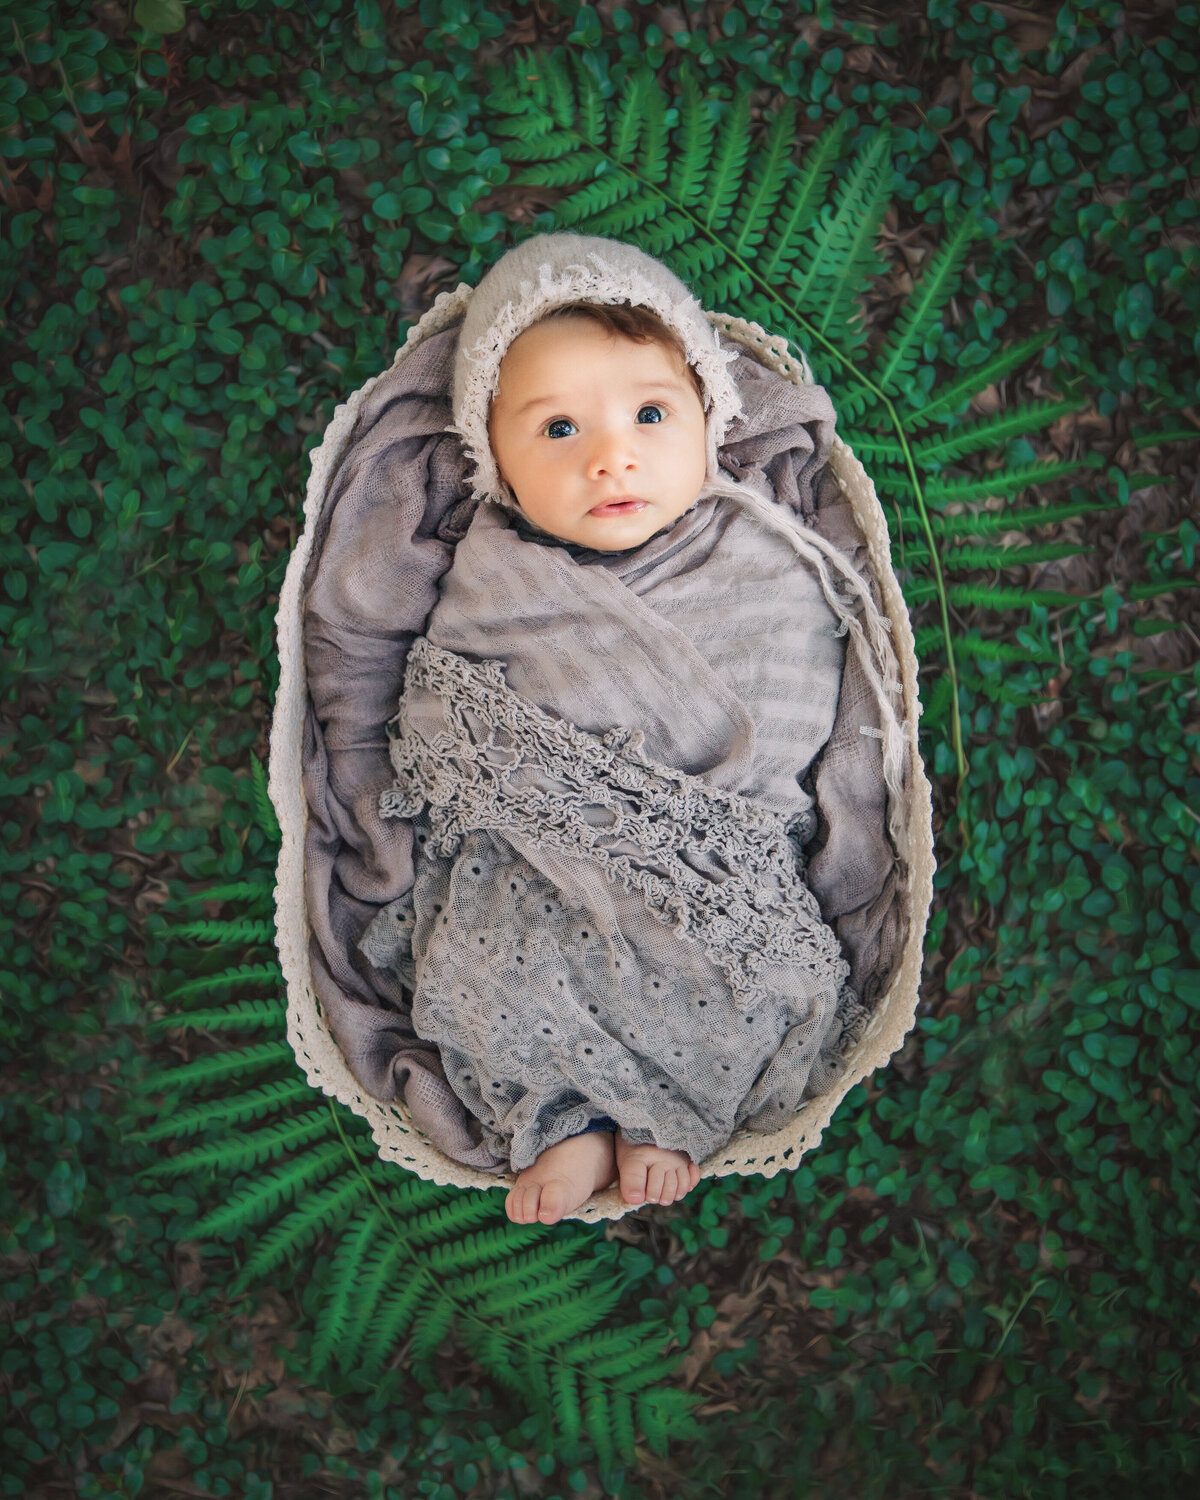 baby swaddled in basket during outdoor photos during newborn photography session at Veterans Park in Hamilton, New Jersey